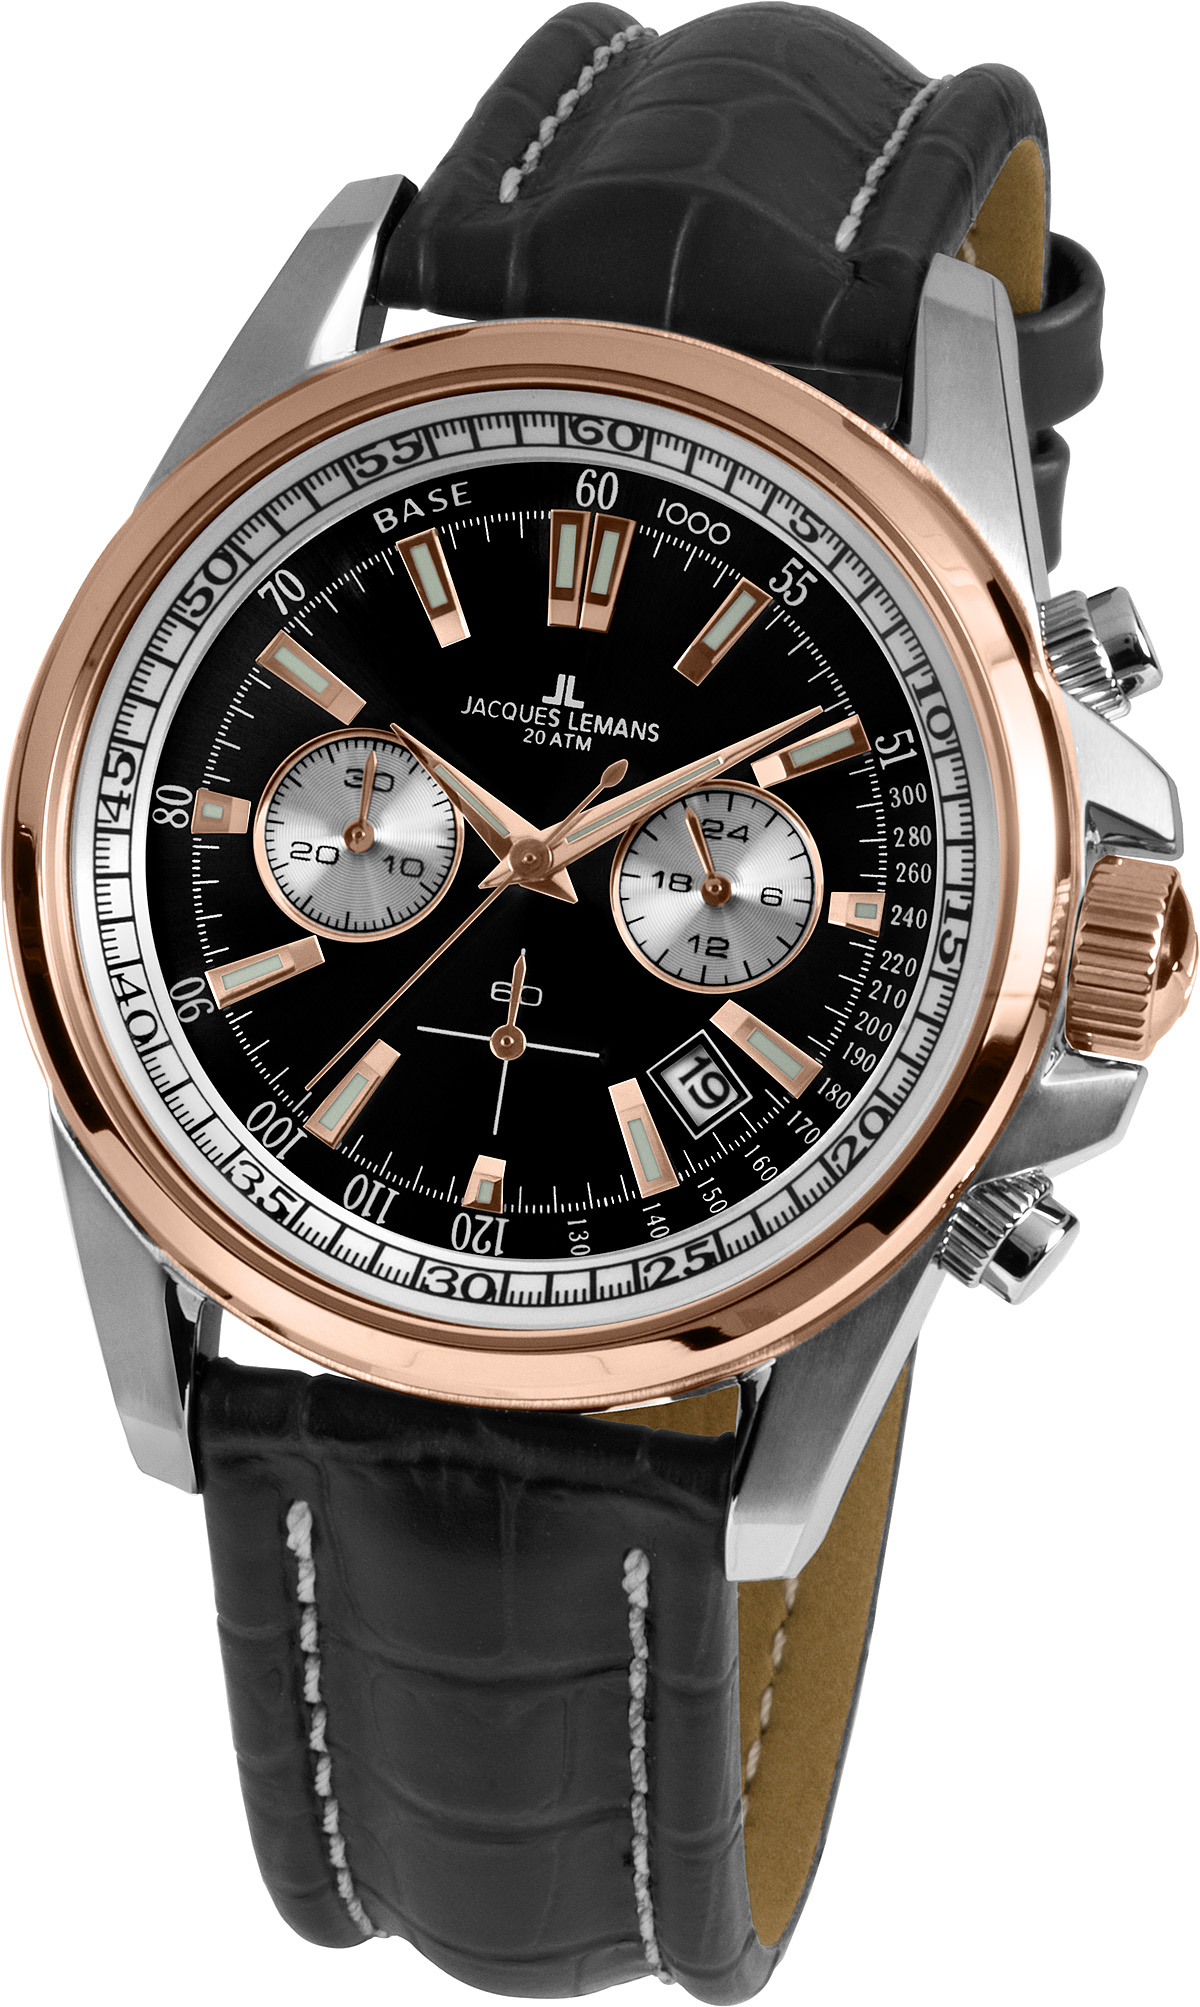 Brands Jacques Lemans - On Time 1-1117.MN